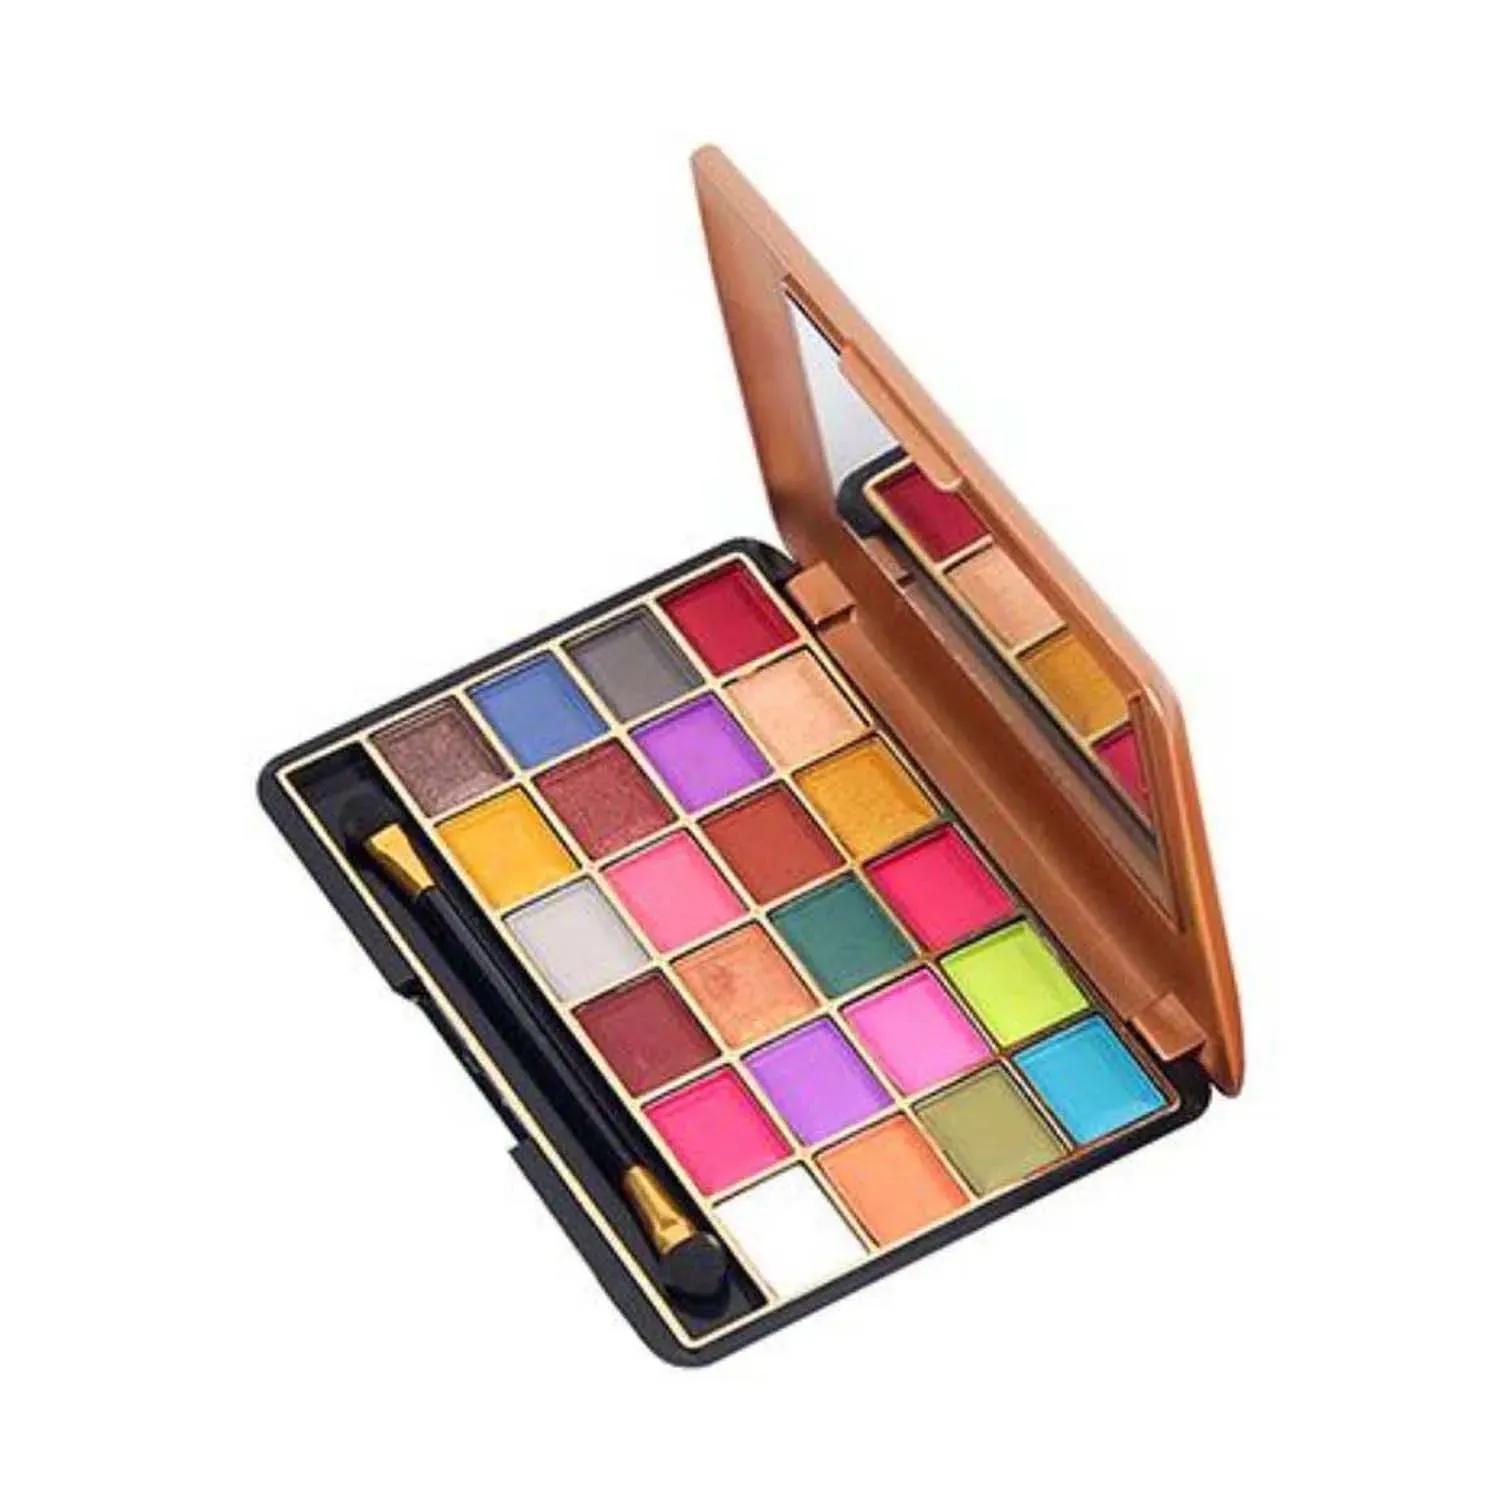 miss rose 24 color glitter eyeshadow palette - ny02 (24g)